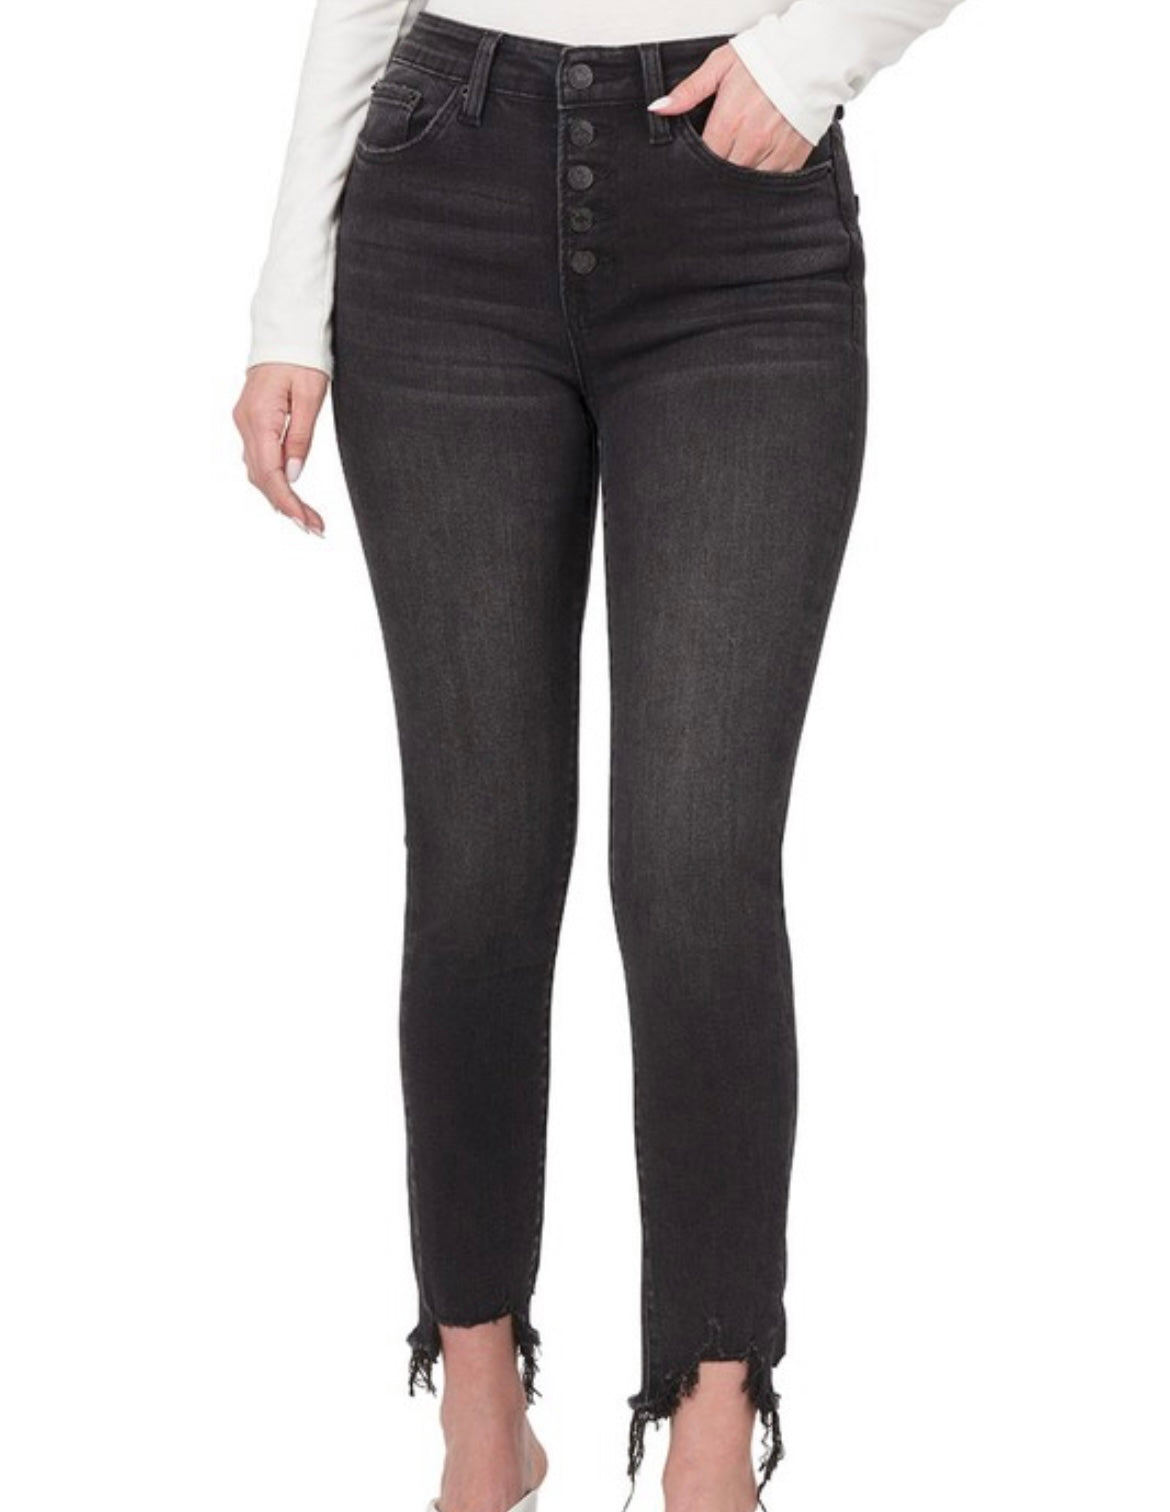 High Rise Washed Black Skinny Jeans